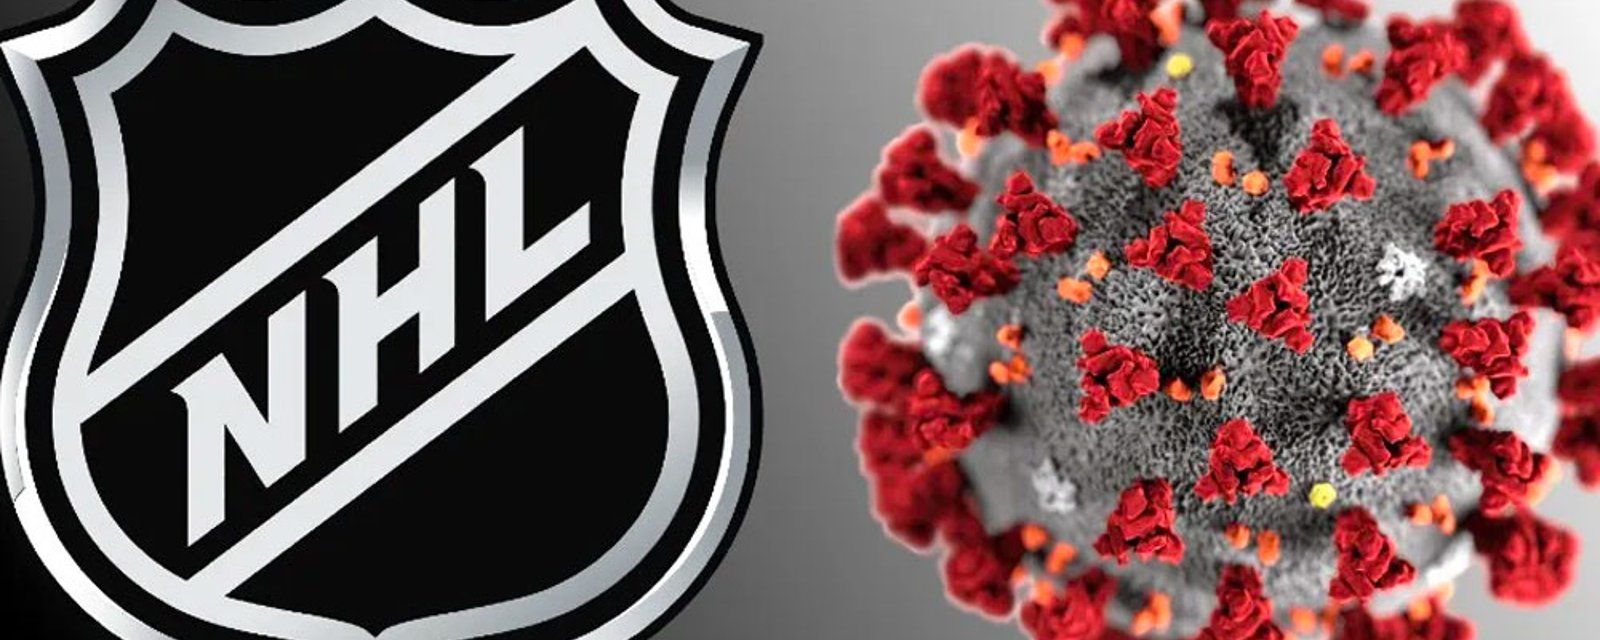 NHL's vaccine policy reportedly allows for some exceptions